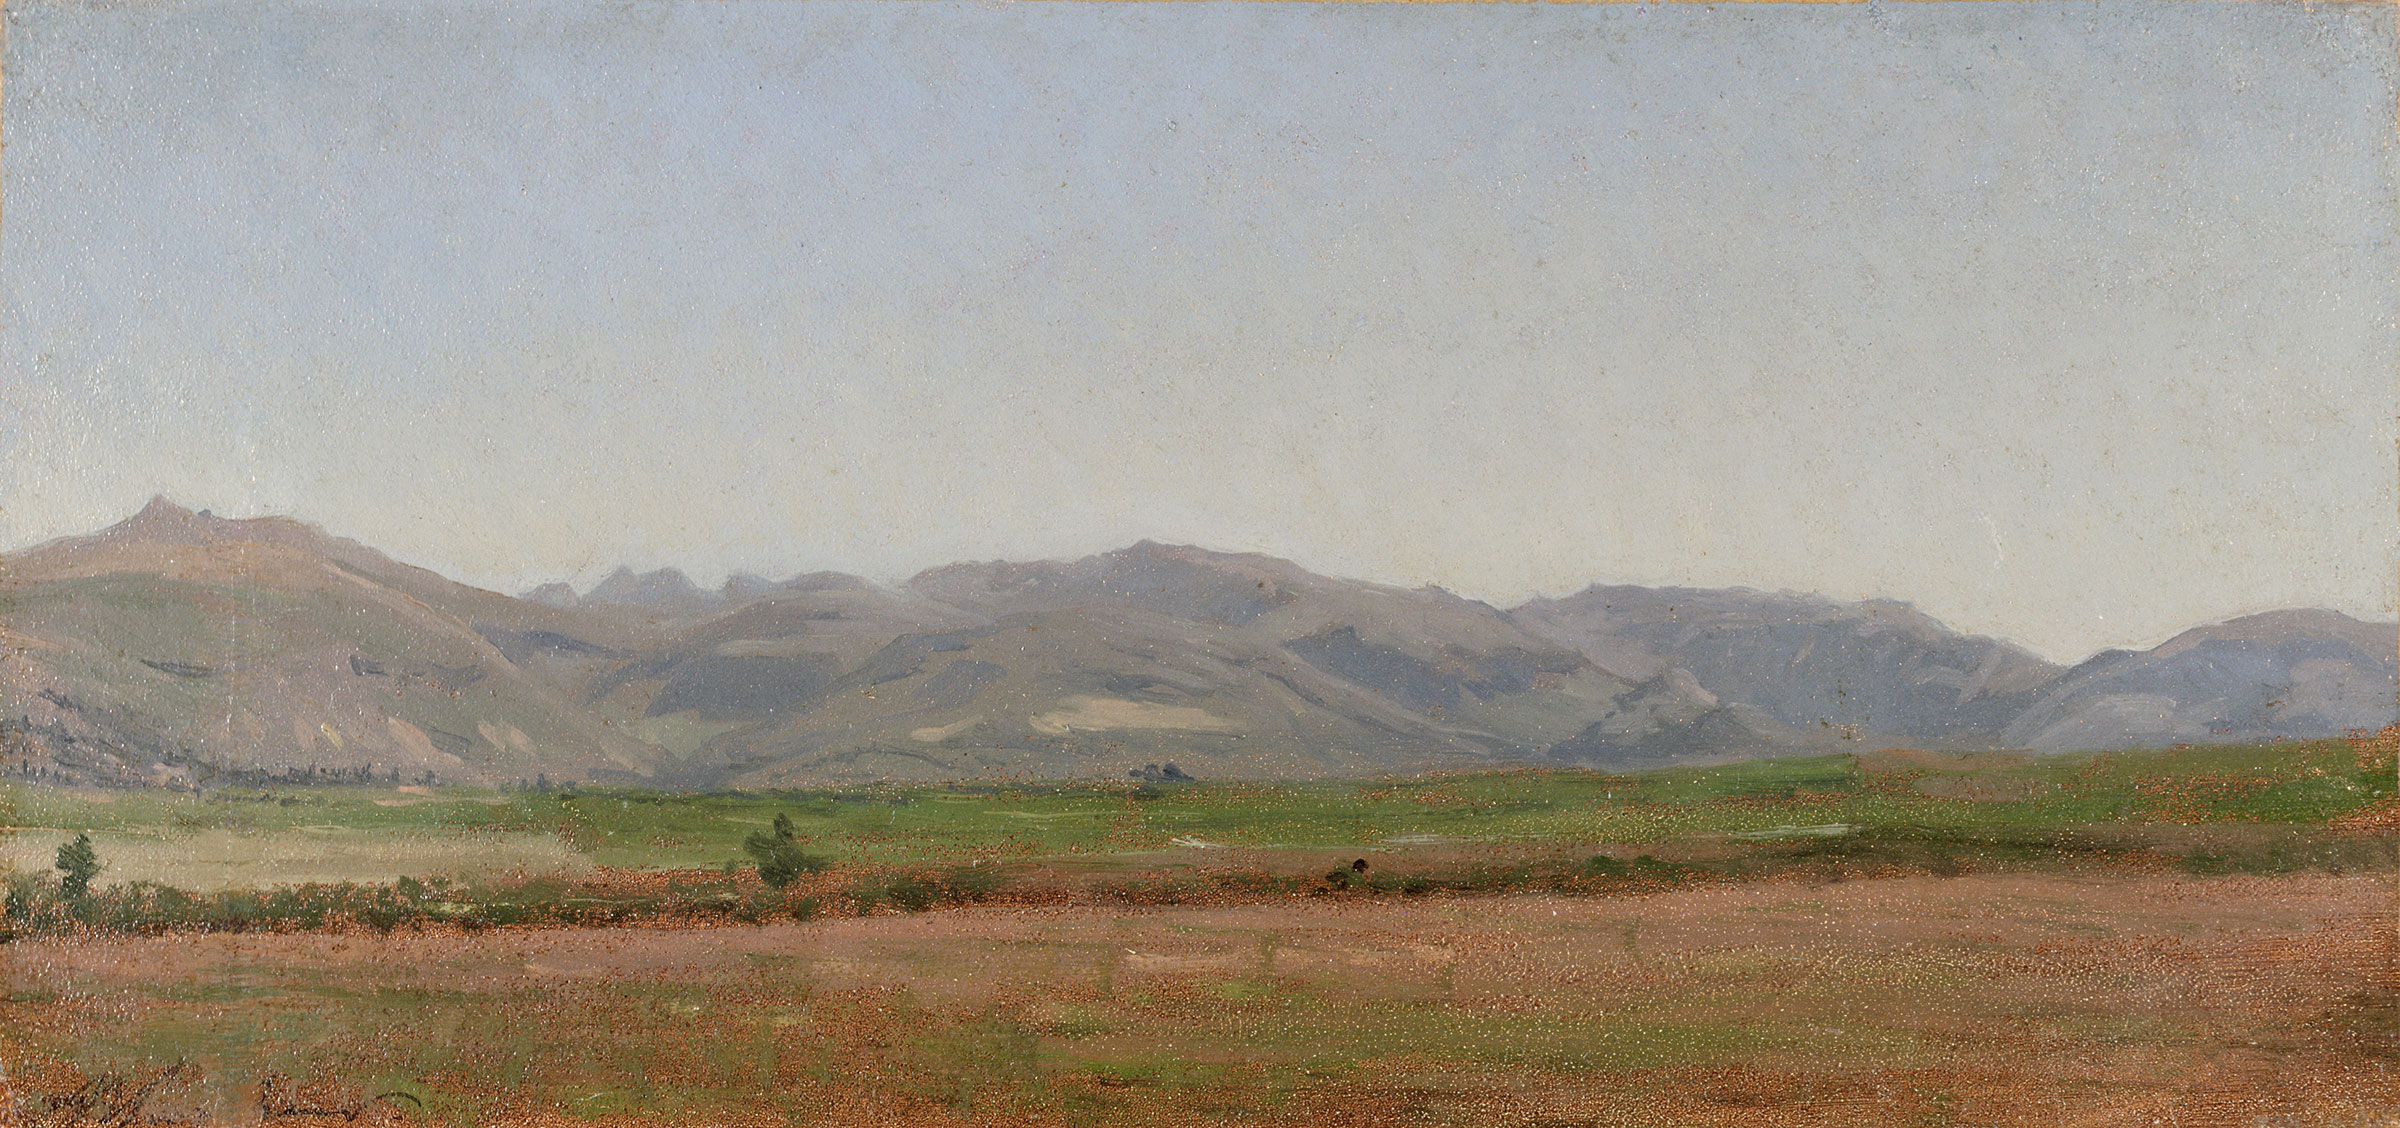 Landscape with Distant Mountains | The Morgan Library & Museum